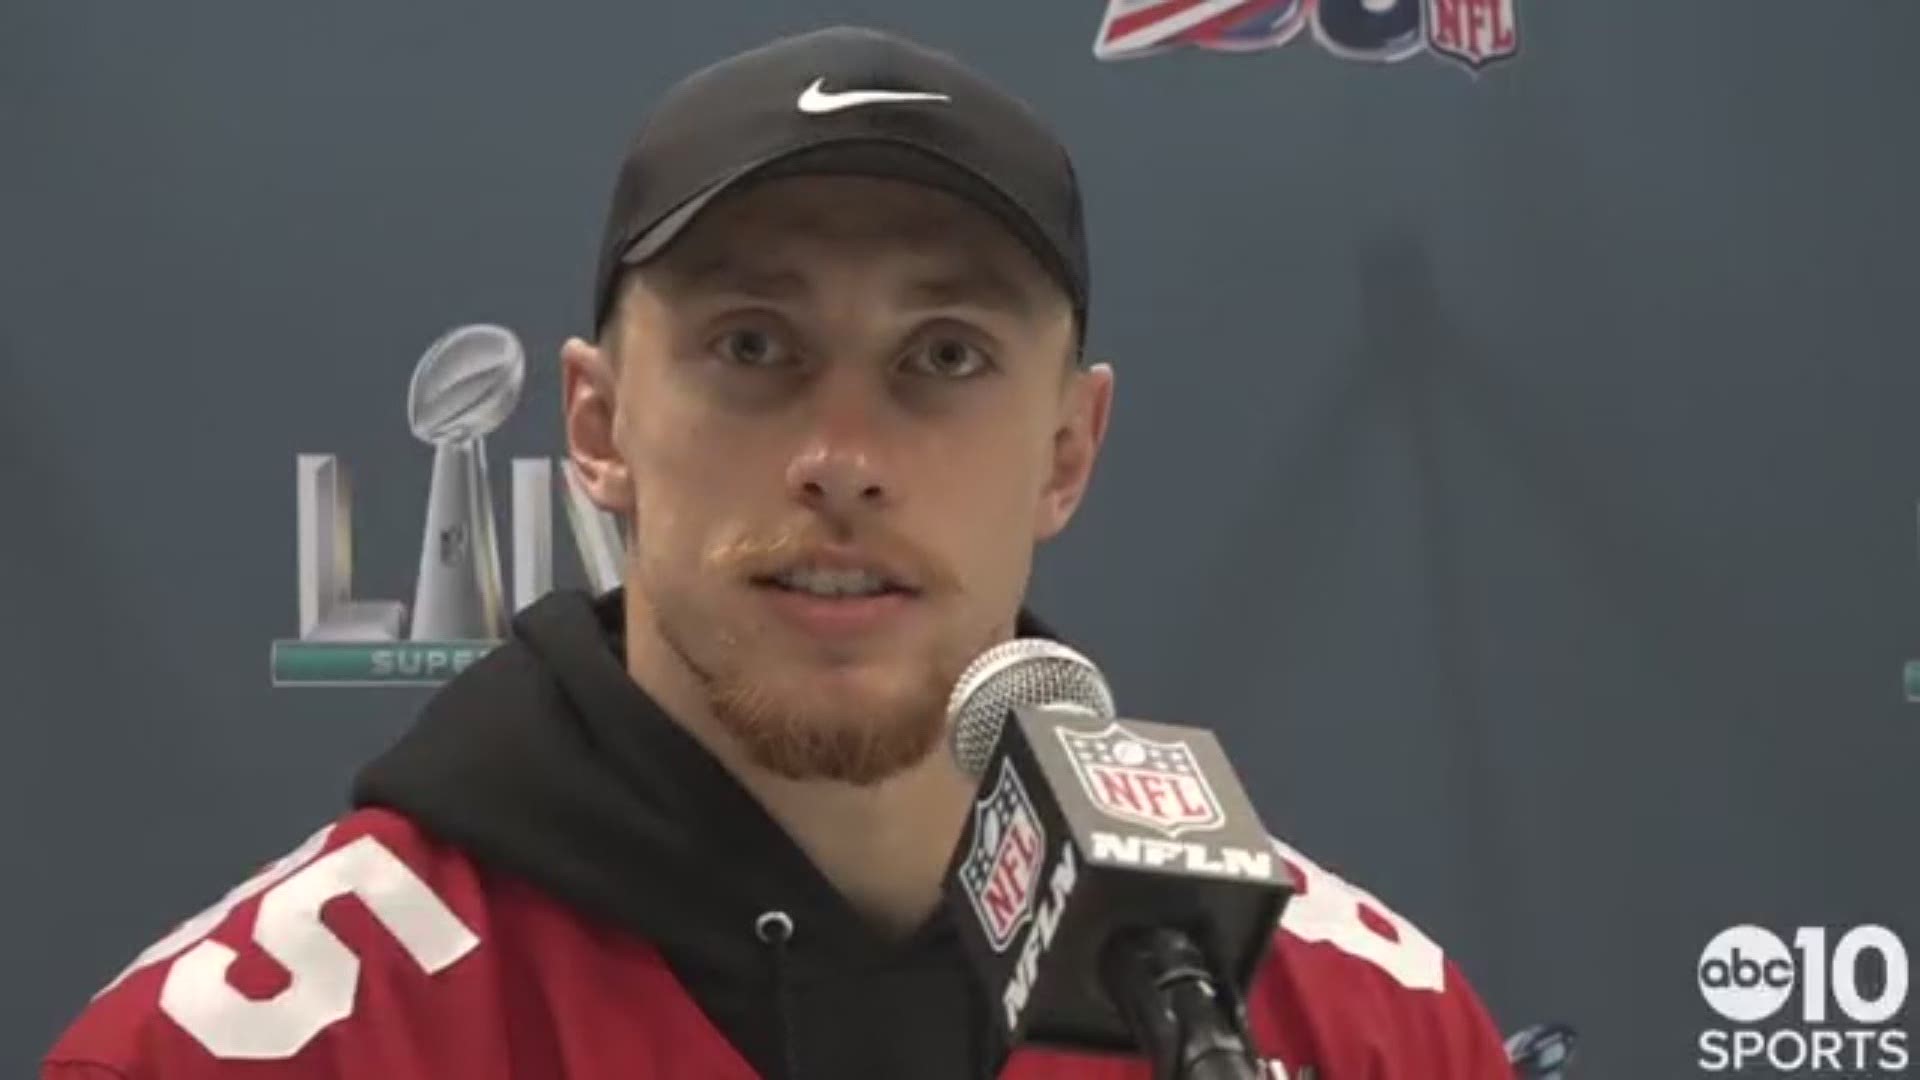 San Francisco 49ers tight end George Kittle discusses his experience at Super Bowl LIV in Miami before the big game.